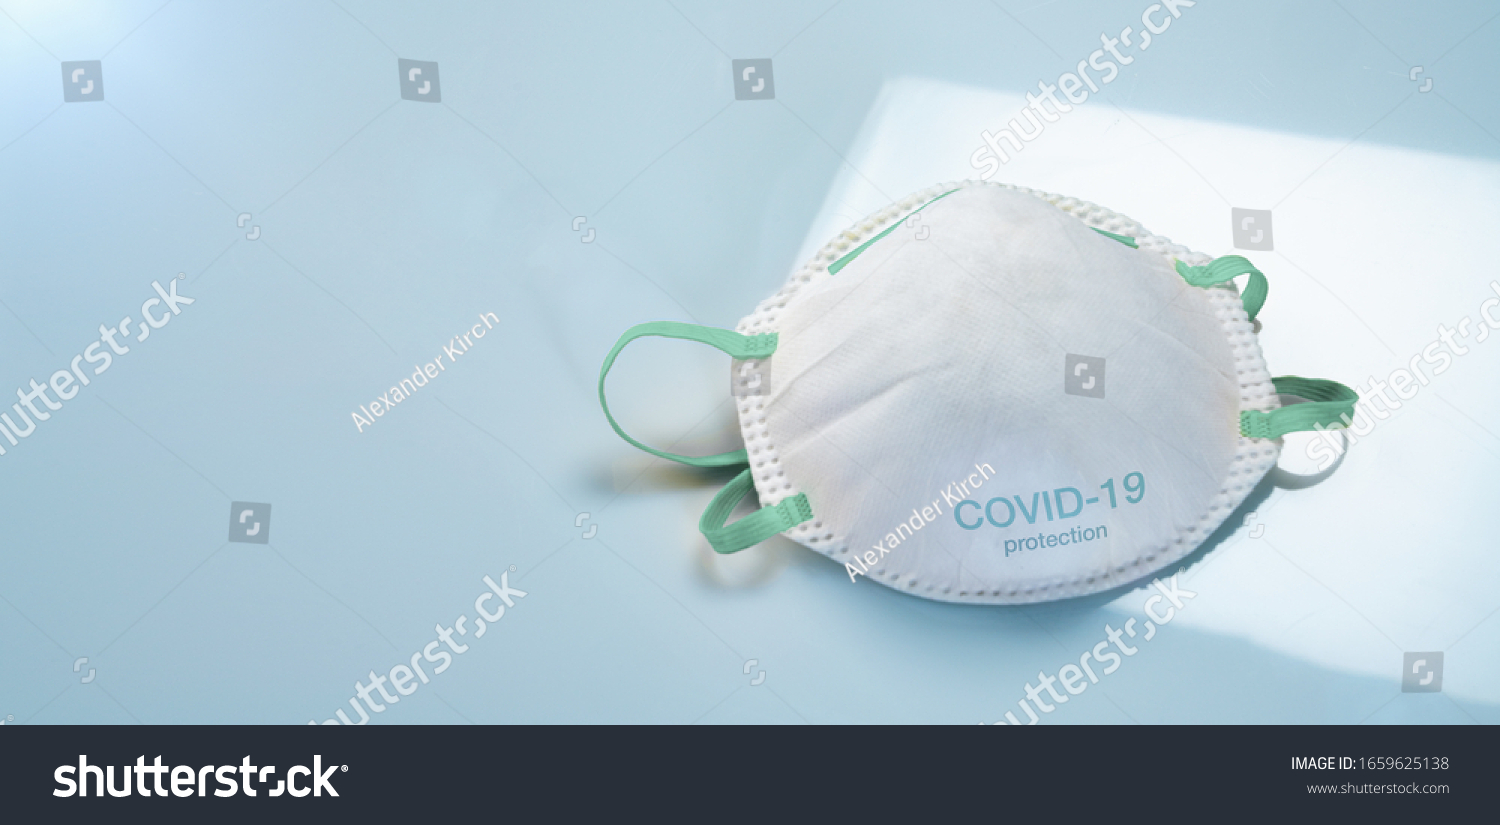 Anti virus protection mask ffp2 standart to prevent corona COVID-19 and Sars-CoV-2 infection #1659625138